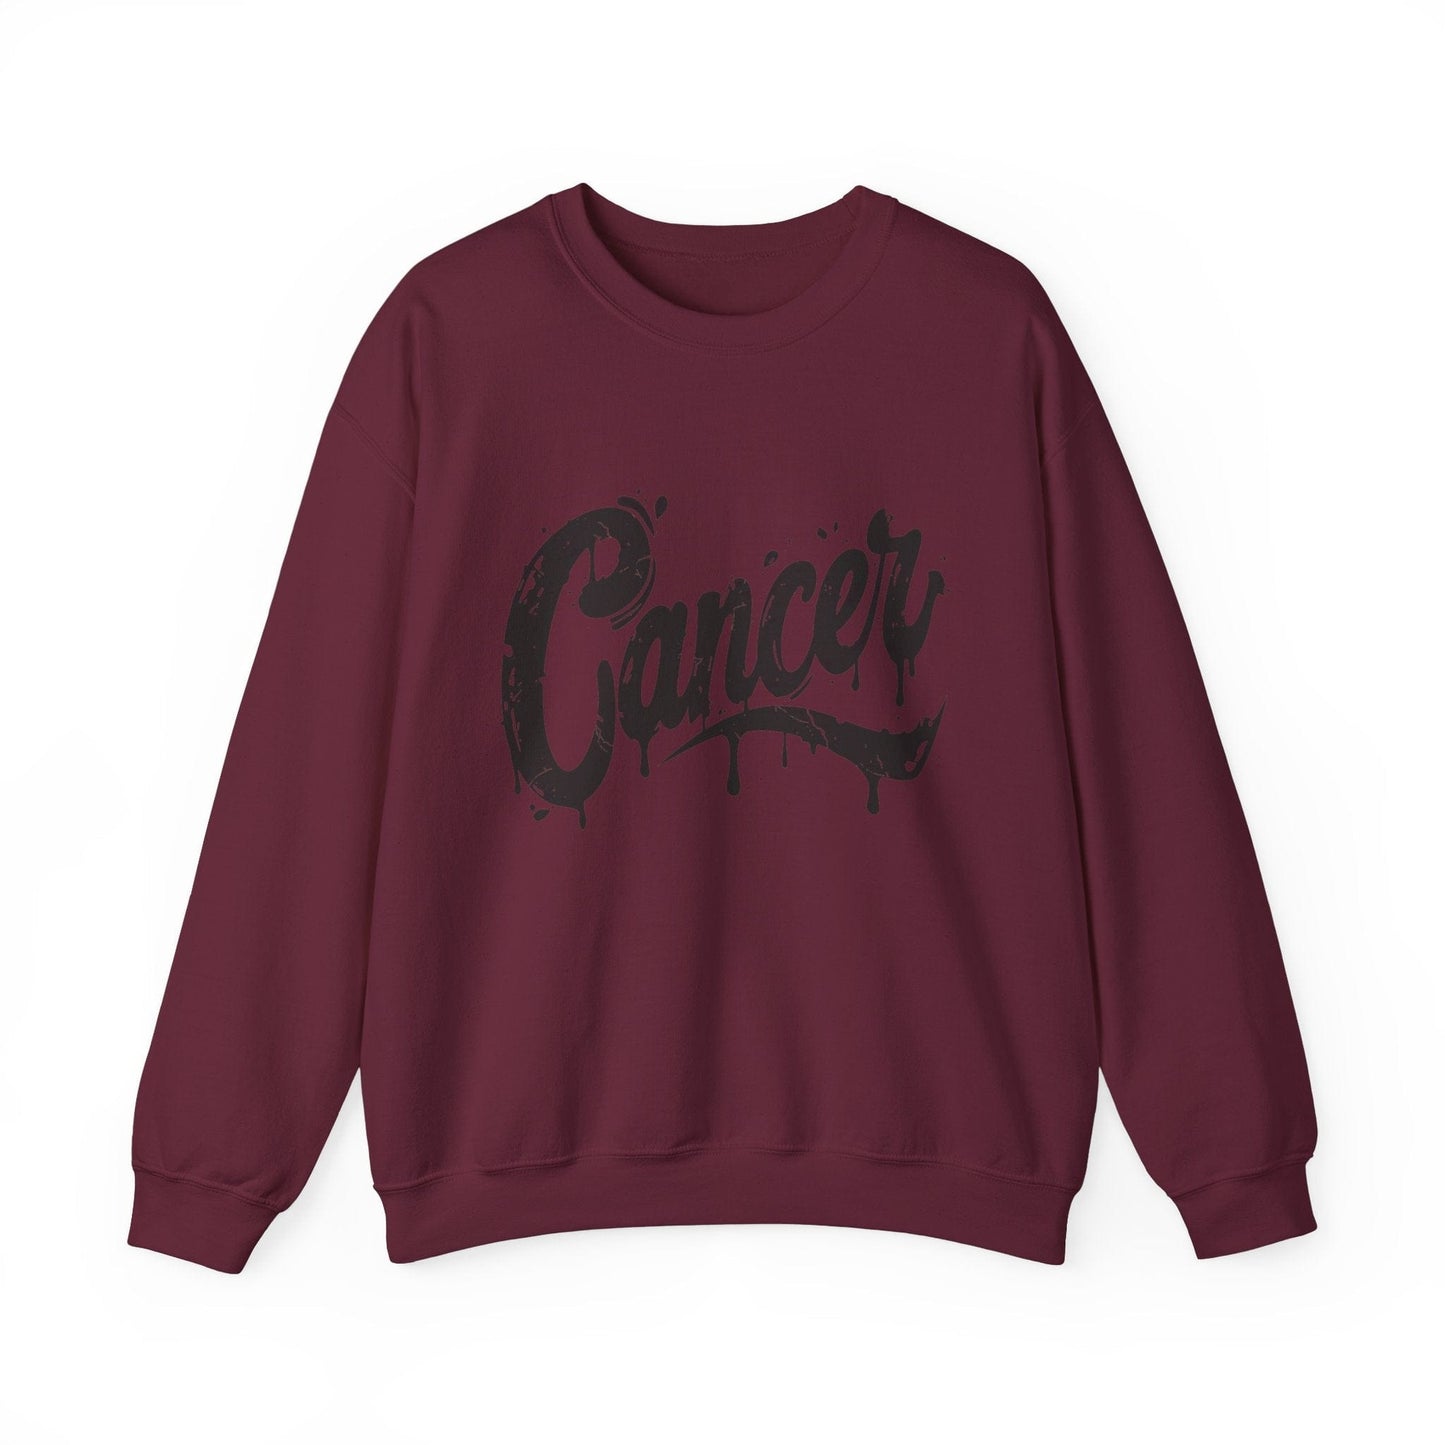 Sweatshirt S / Maroon Tidal Emotion Cancer Sweater: Comfort in the Currents